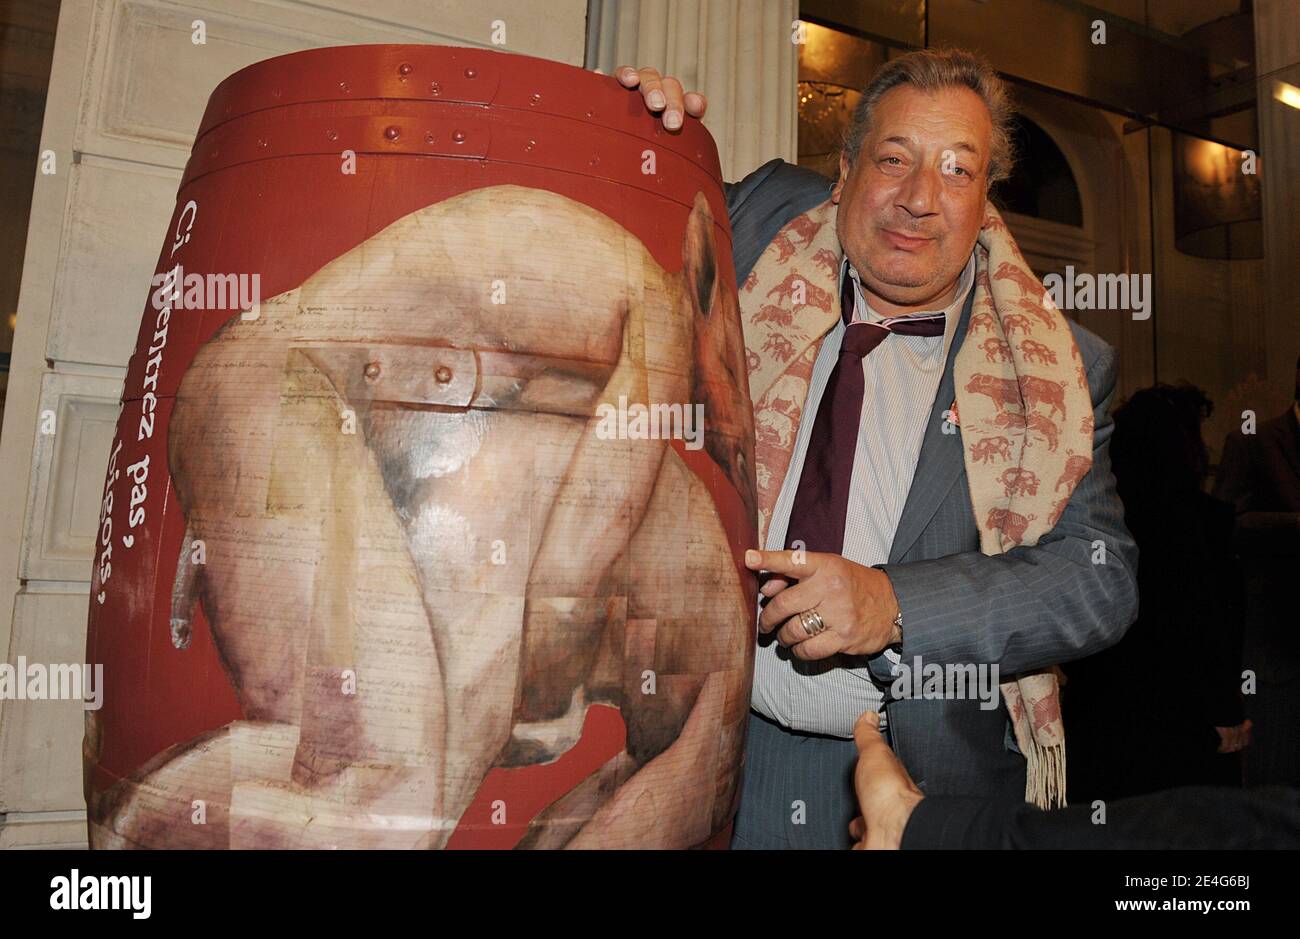 Jean-Claude Dreyfus attending the 'Barriques Hautes Coutures' Exhibition presented by Gerard Bru at the hotel Westin in Paris, France on October 26, 2009. Photo by Giancarlo Gorassini/ABACAPRESS.COM Stock Photo